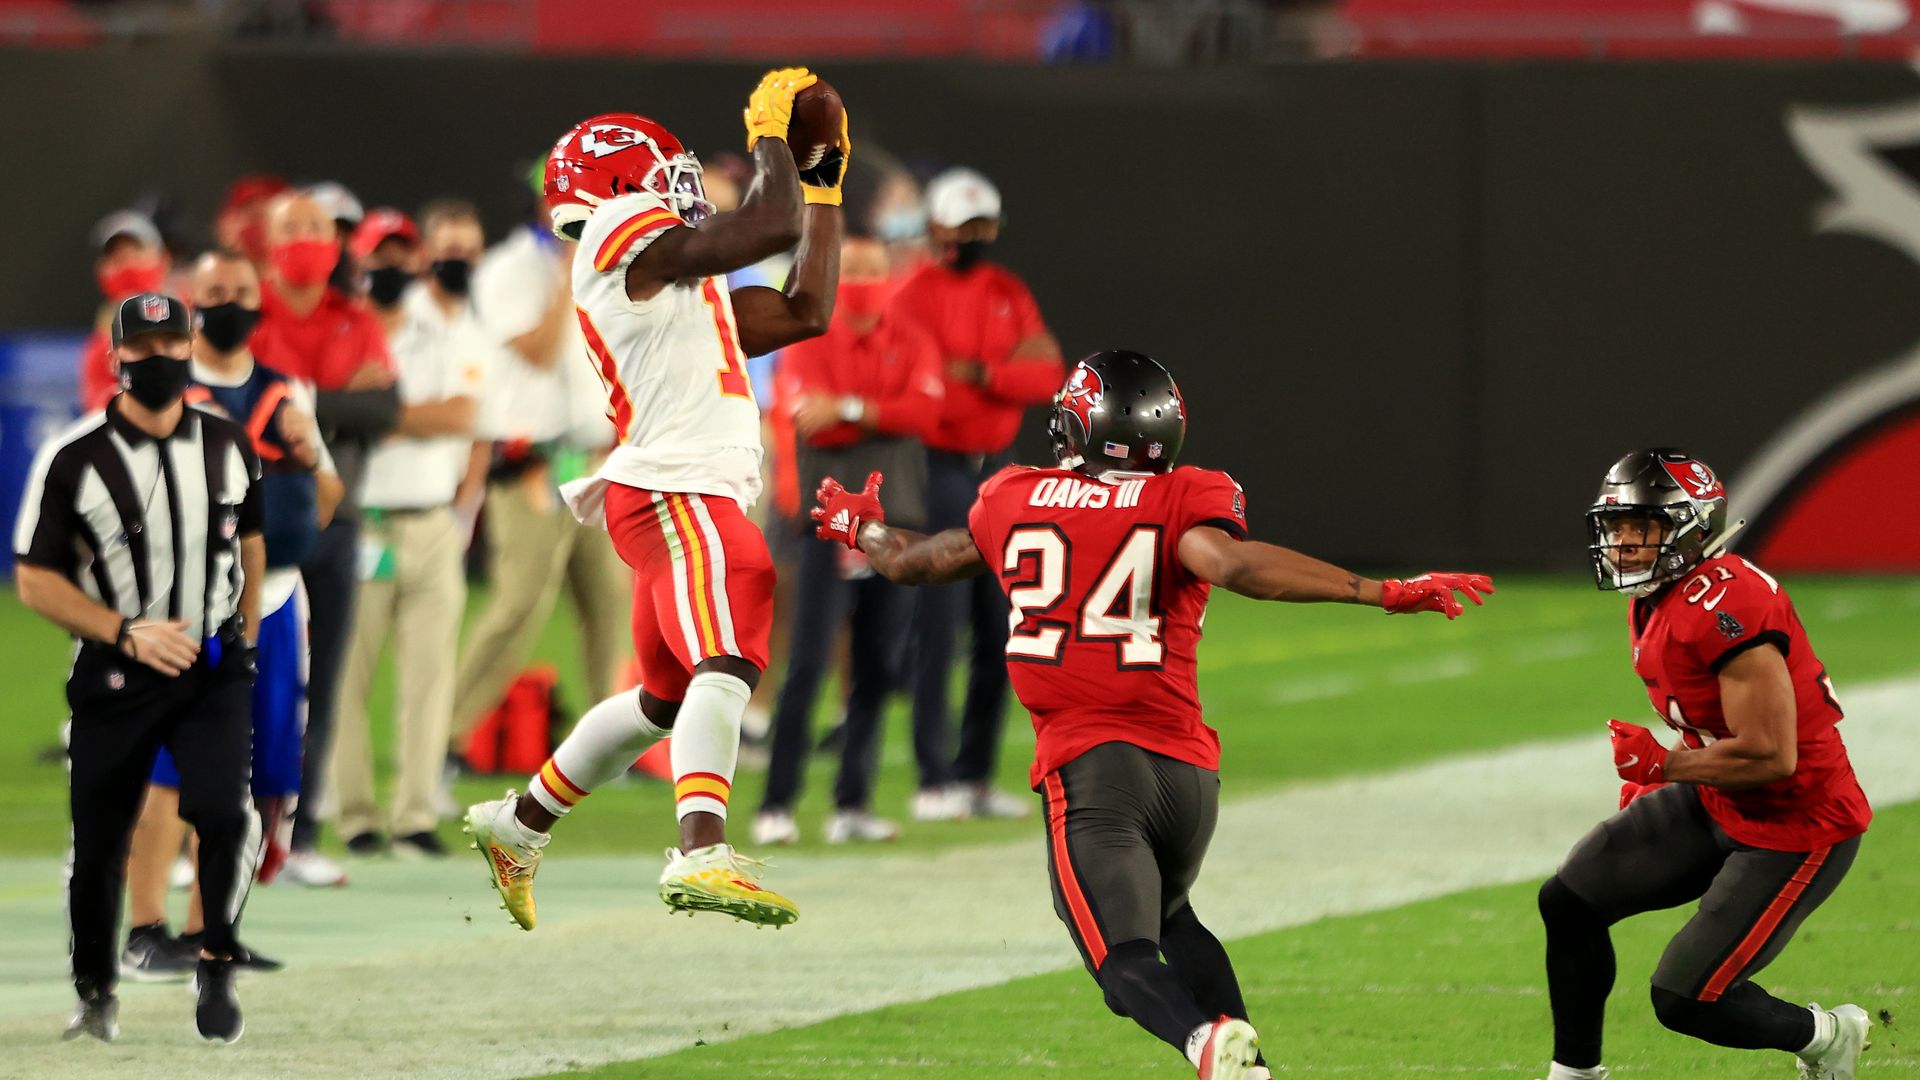 tyreek hill leaps for a catch